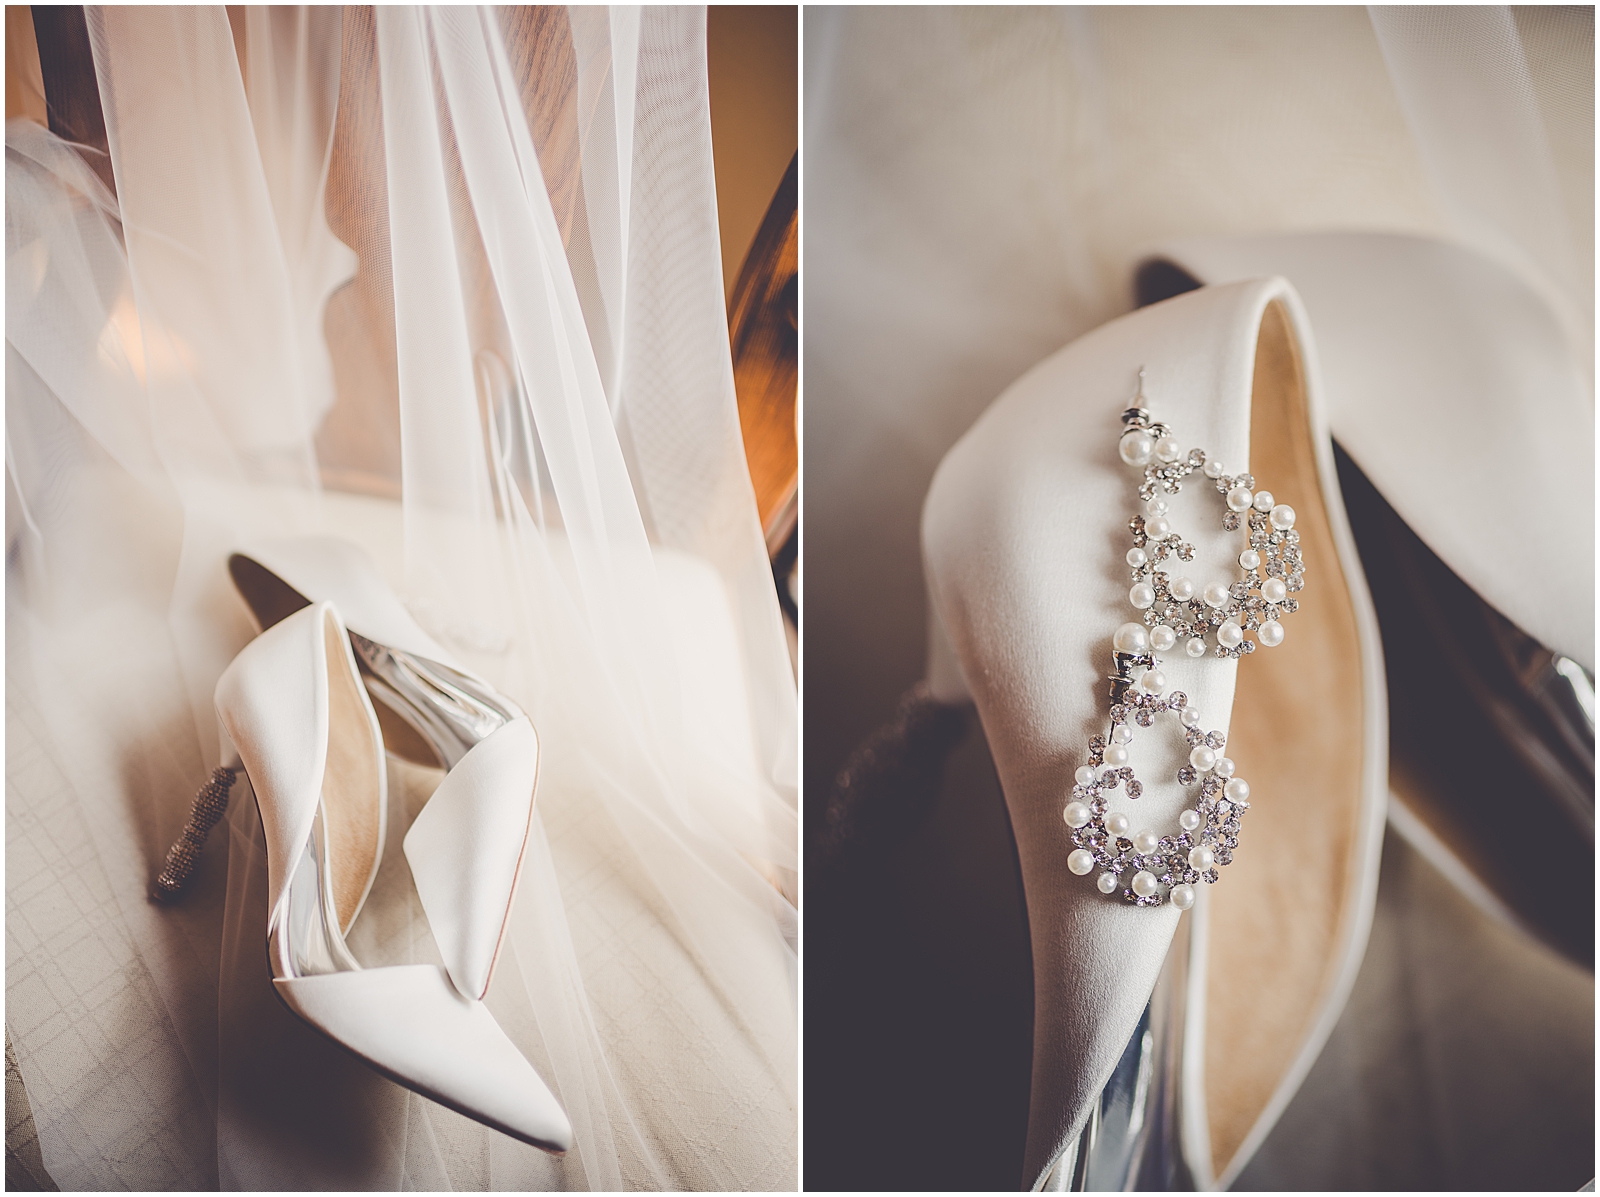 Julie and Paul's timeless & classic October wedding in Chicago, IL with Chicagoland wedding photographer Kara Evans Photographer.